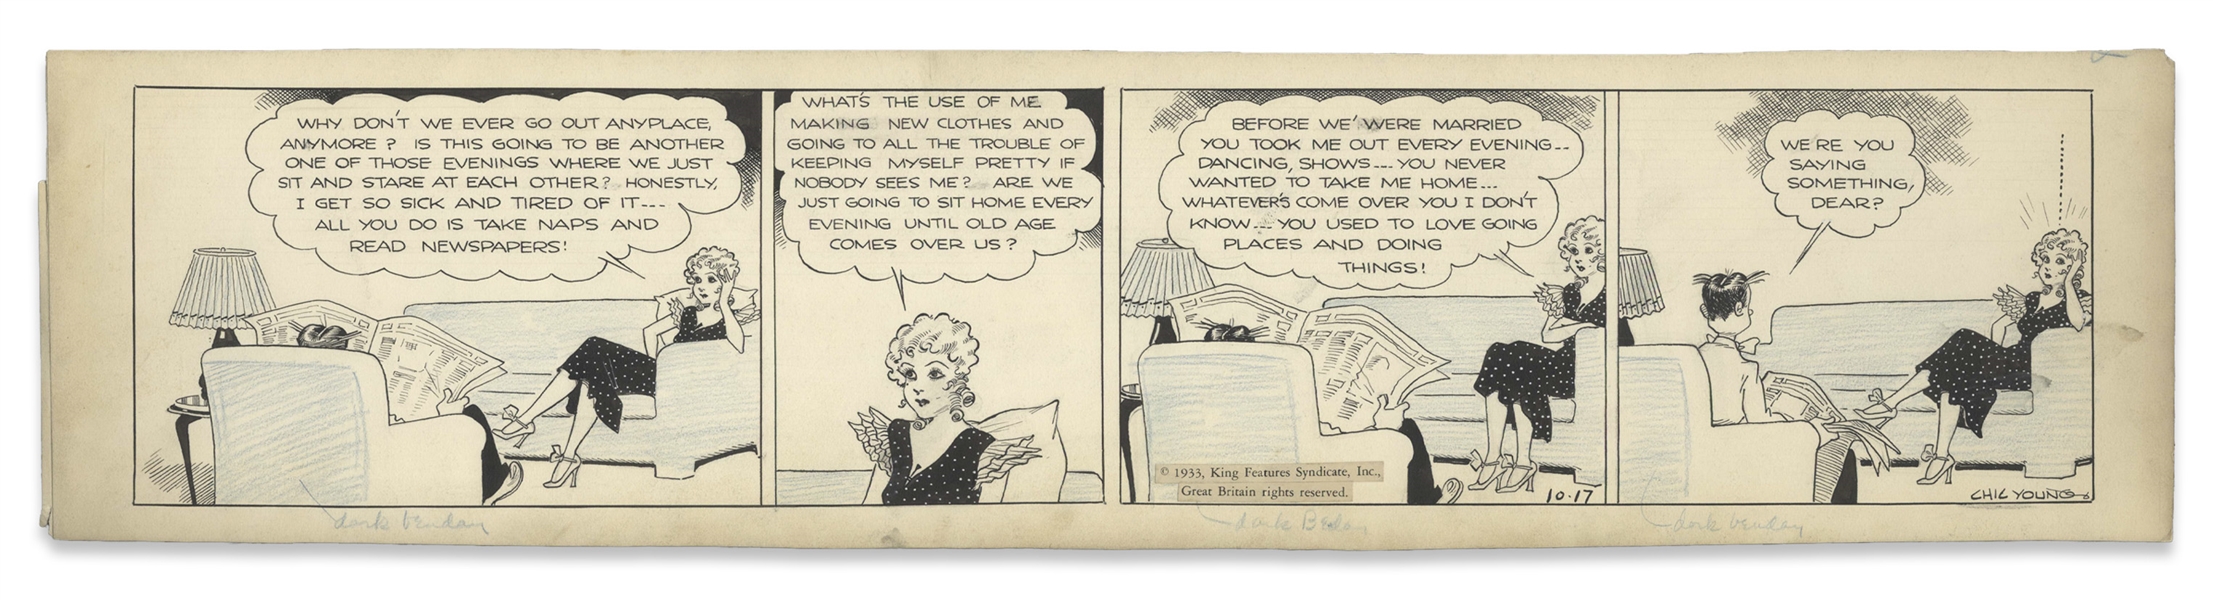 Chic Young Hand-Drawn ''Blondie'' Comic Strip From 1933 Titled ''Wasted Words'' -- Ahh, Married Life